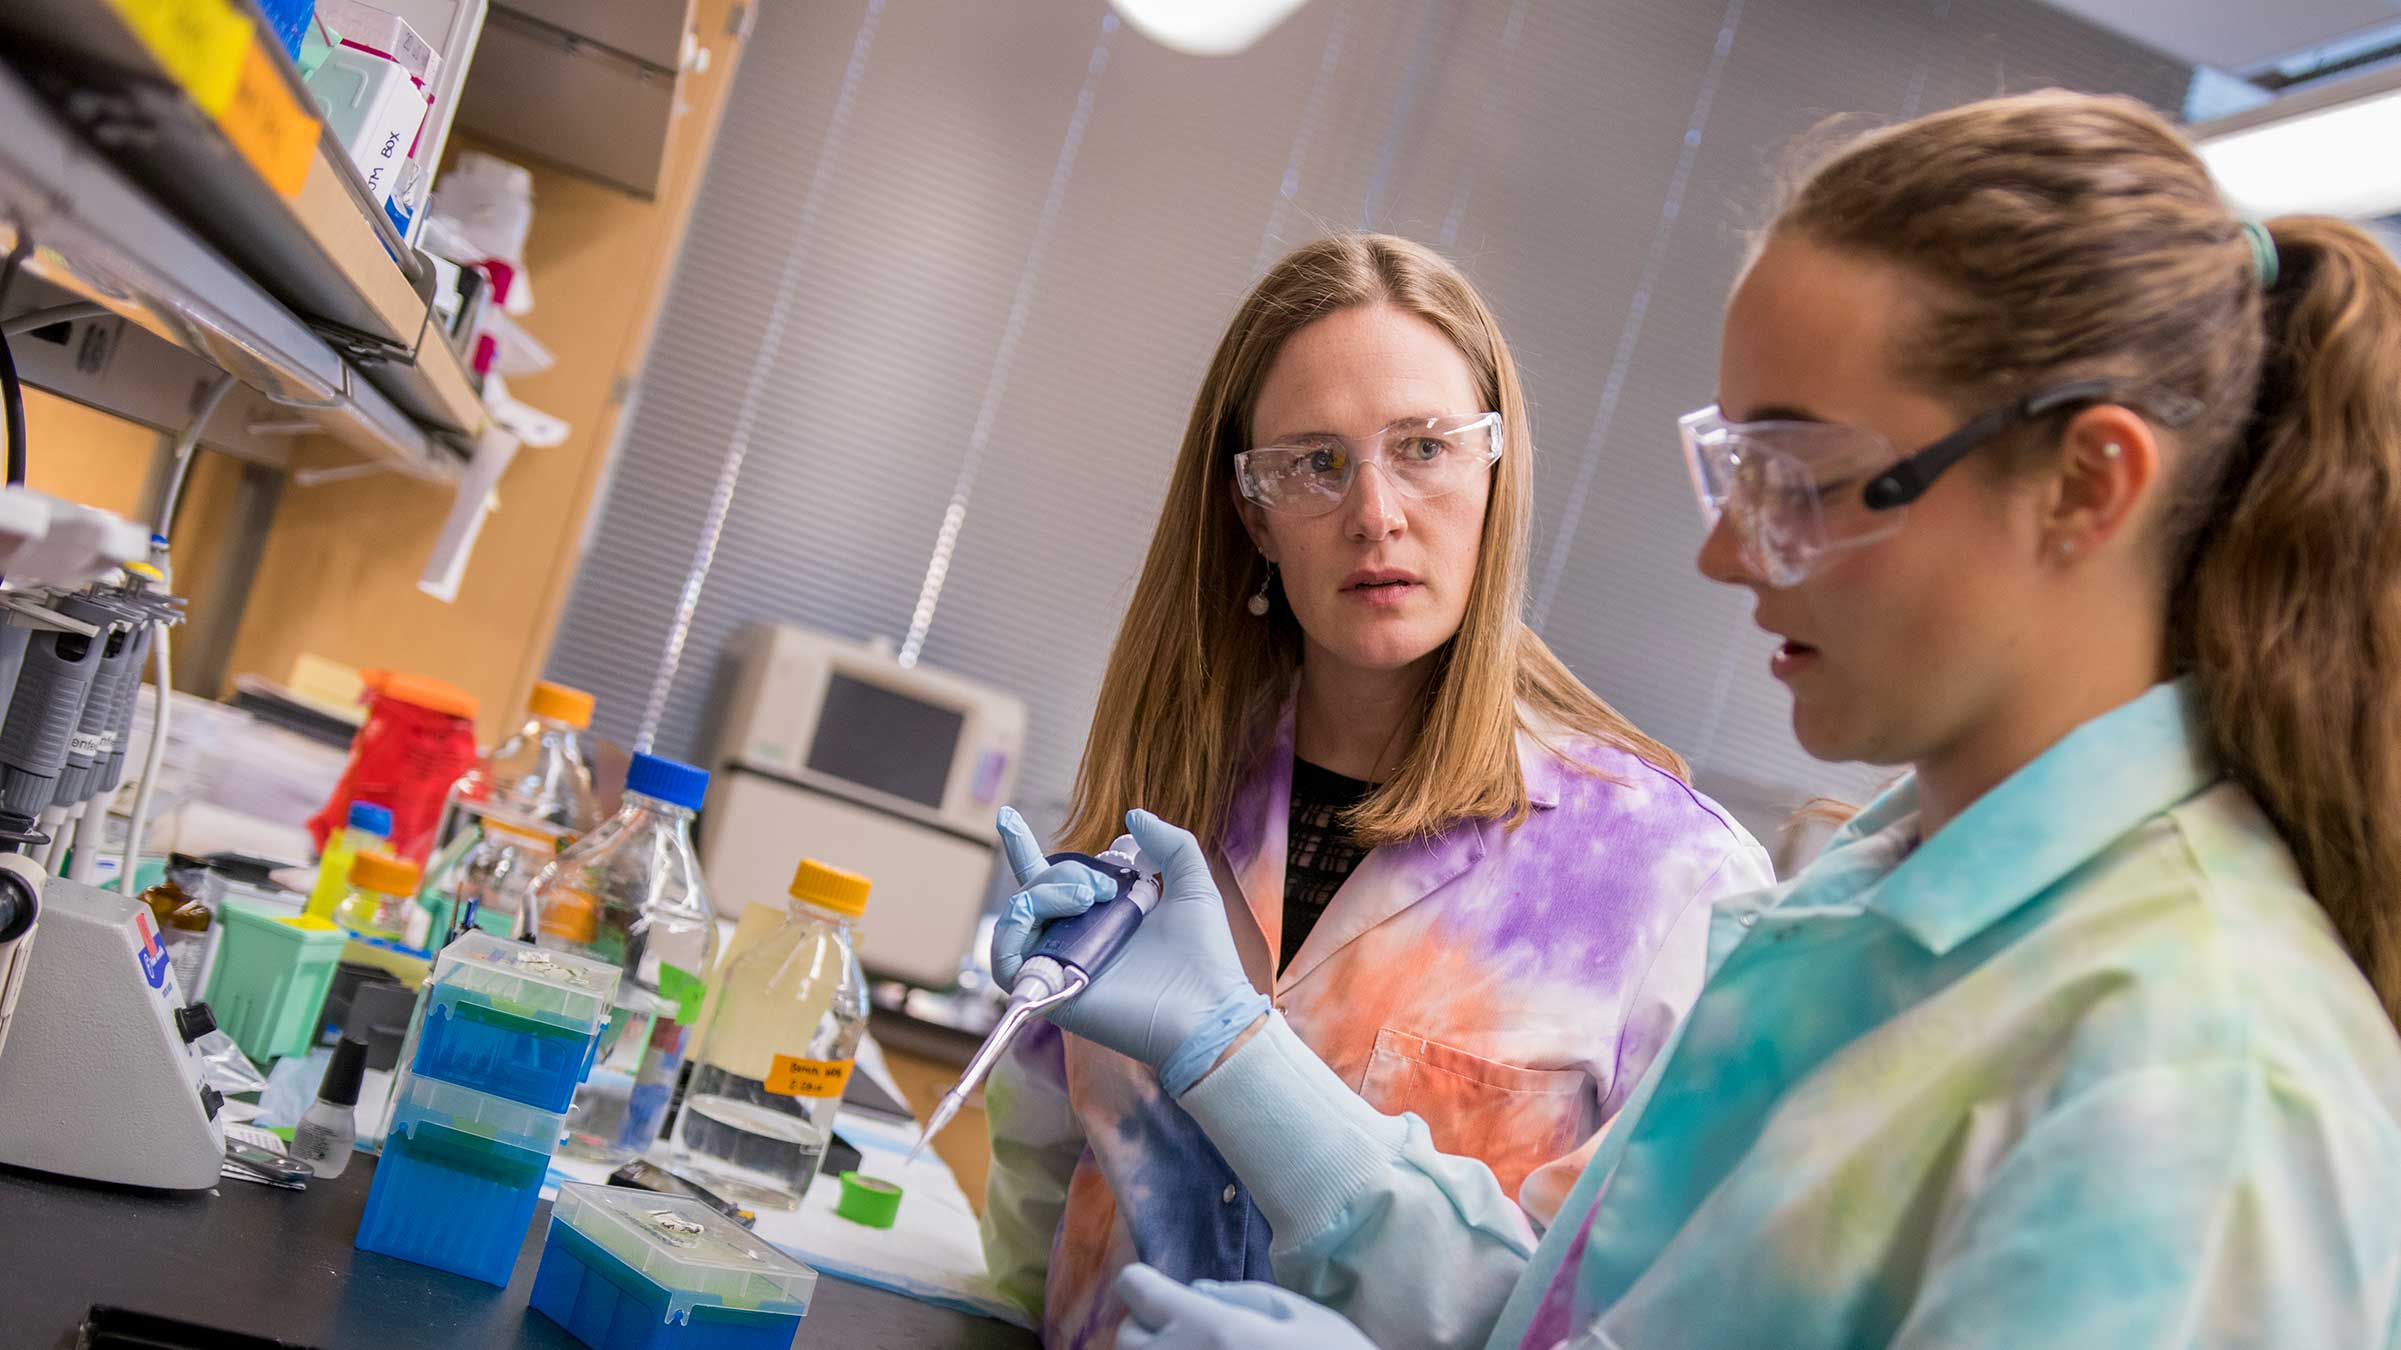 Dr. Stabenfeldt works with a student in her lab